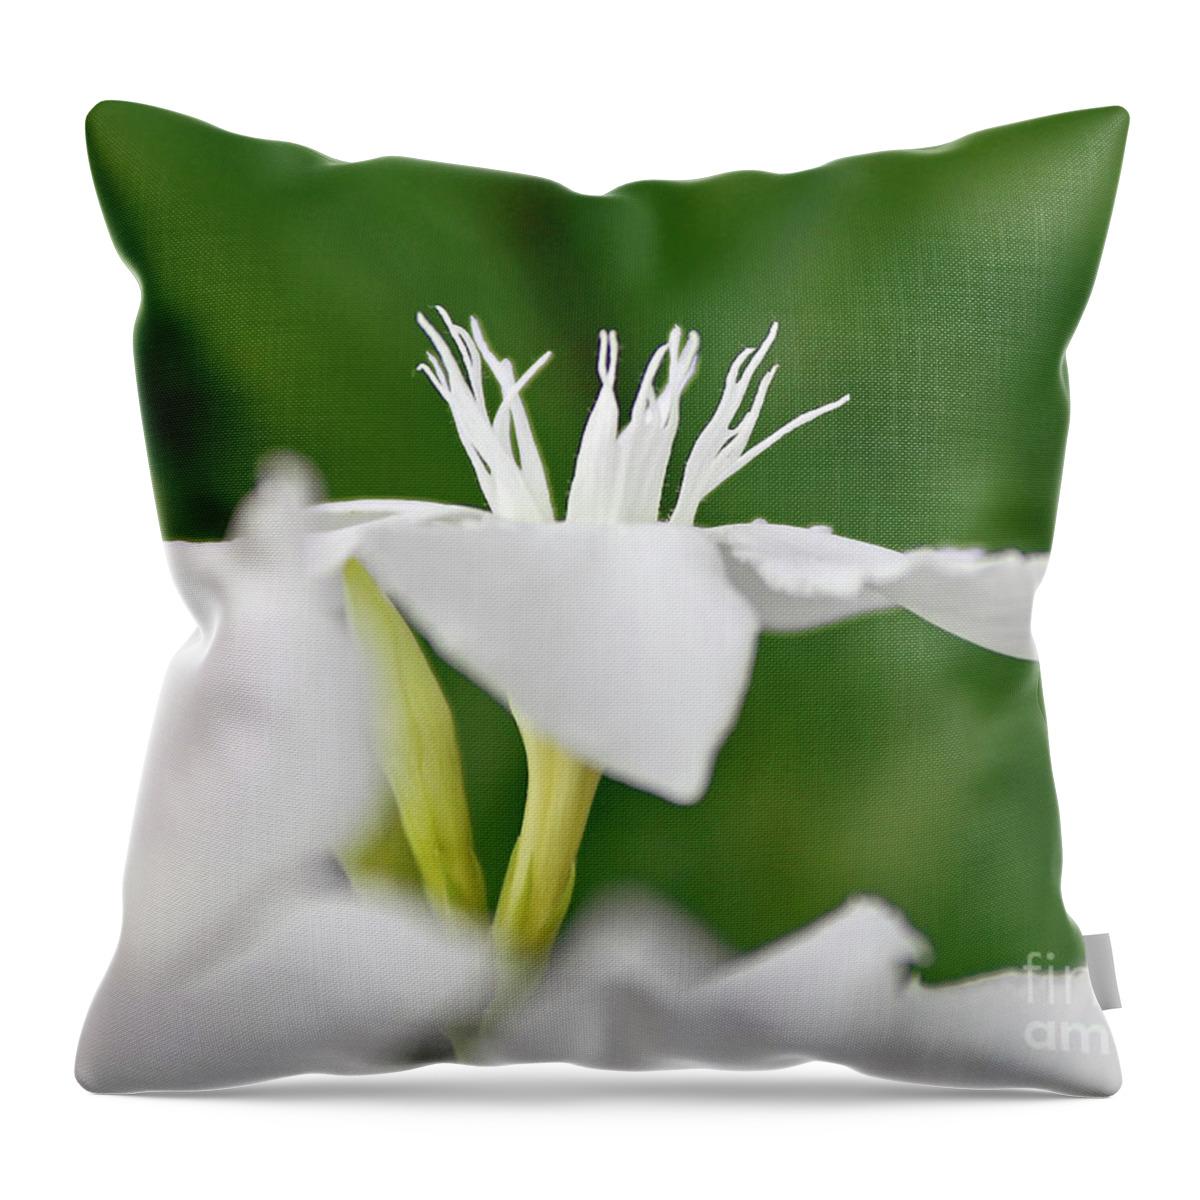 Oleander Throw Pillow featuring the photograph Oleander Ed Barr 1 by Wilhelm Hufnagl